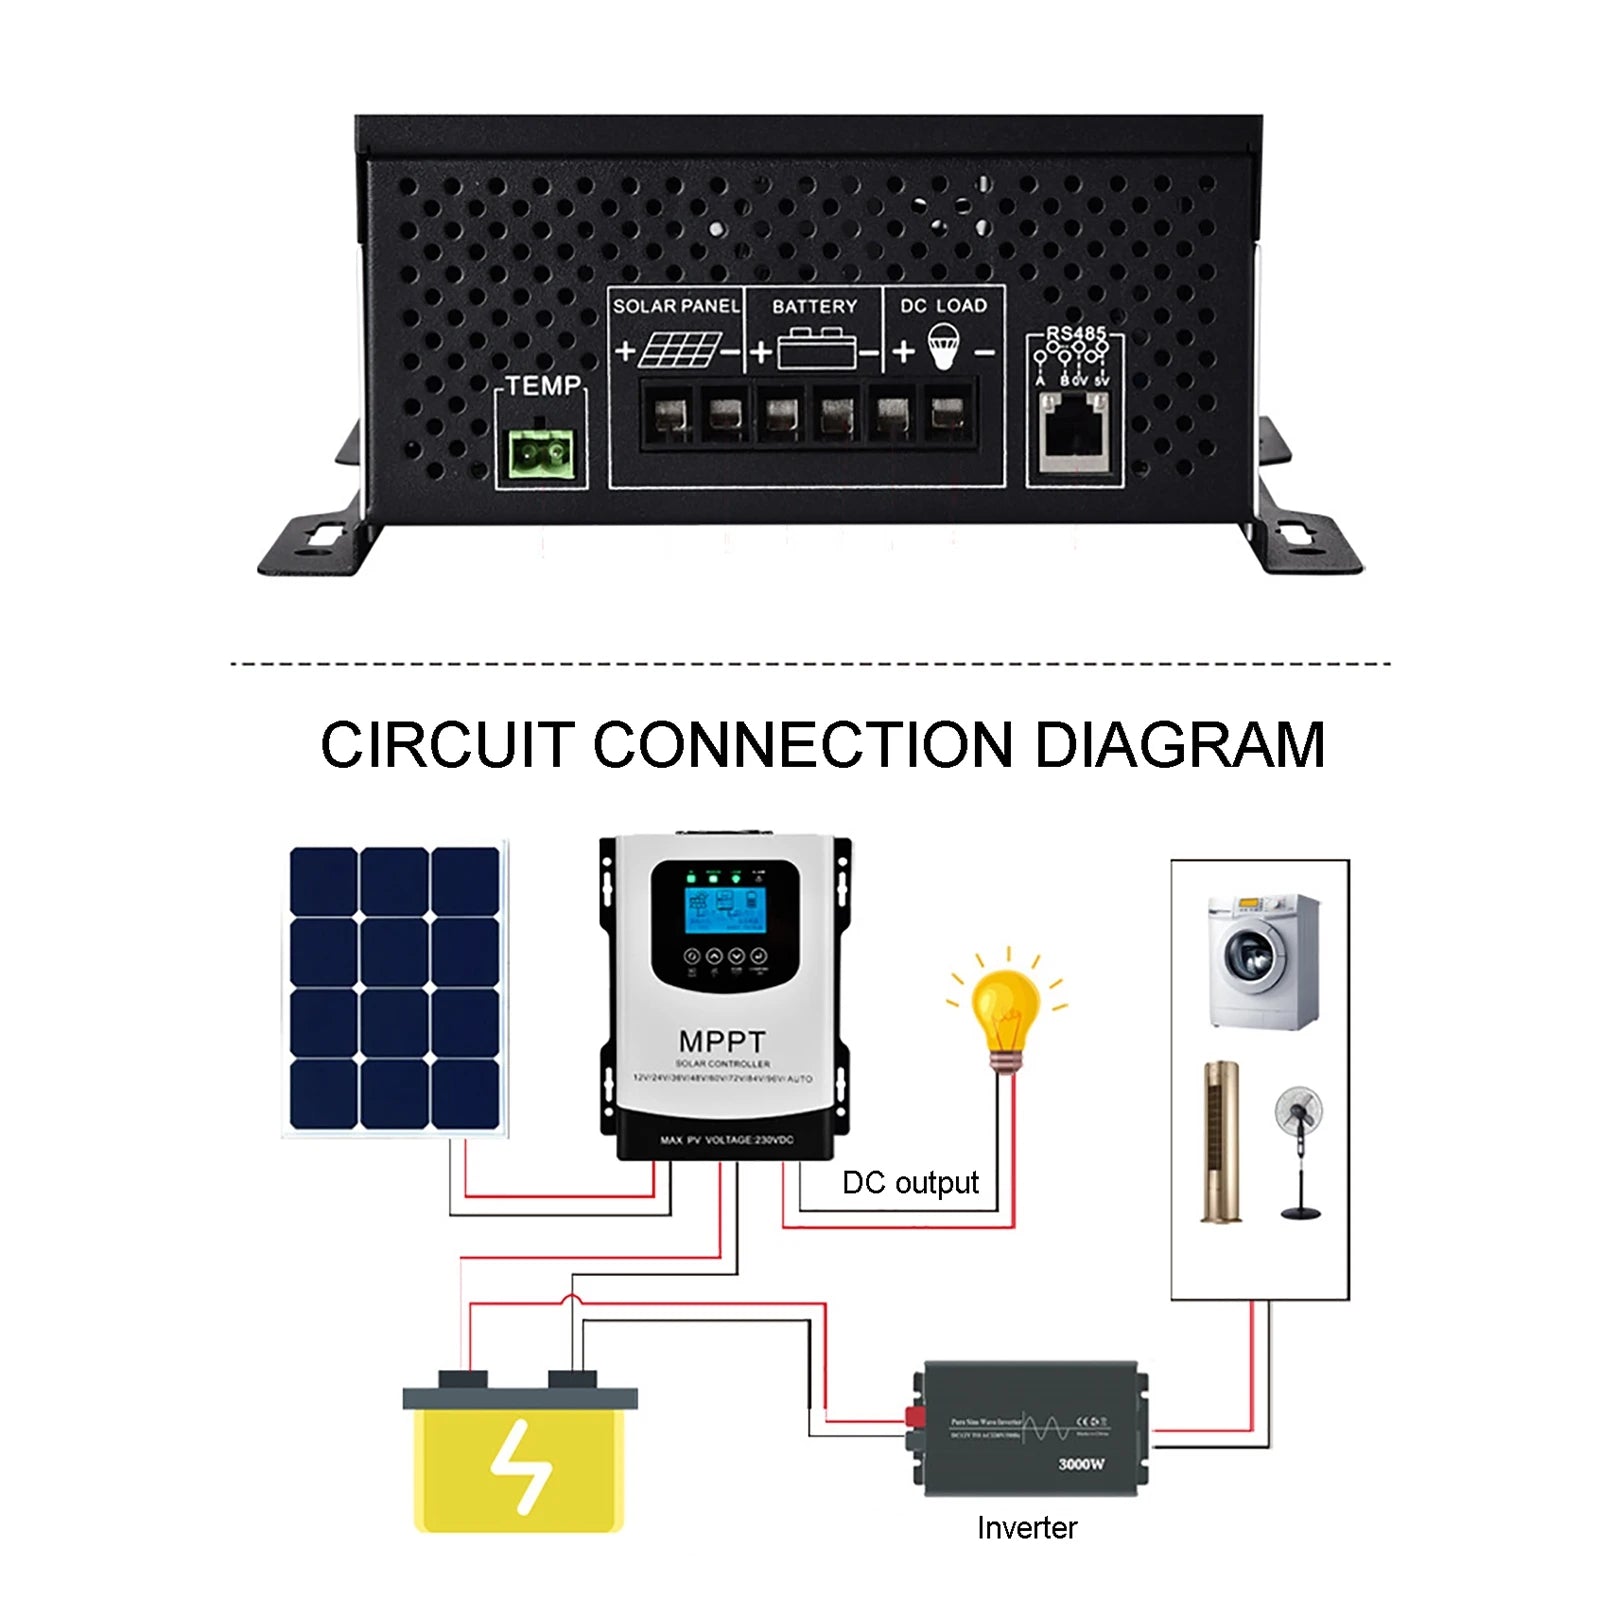 50A 60A MPPT Solar Charge Controller, MPPT Solar Charger: Controls temperature, DC load, and circuit connections for 12V-96V lithium batteries.